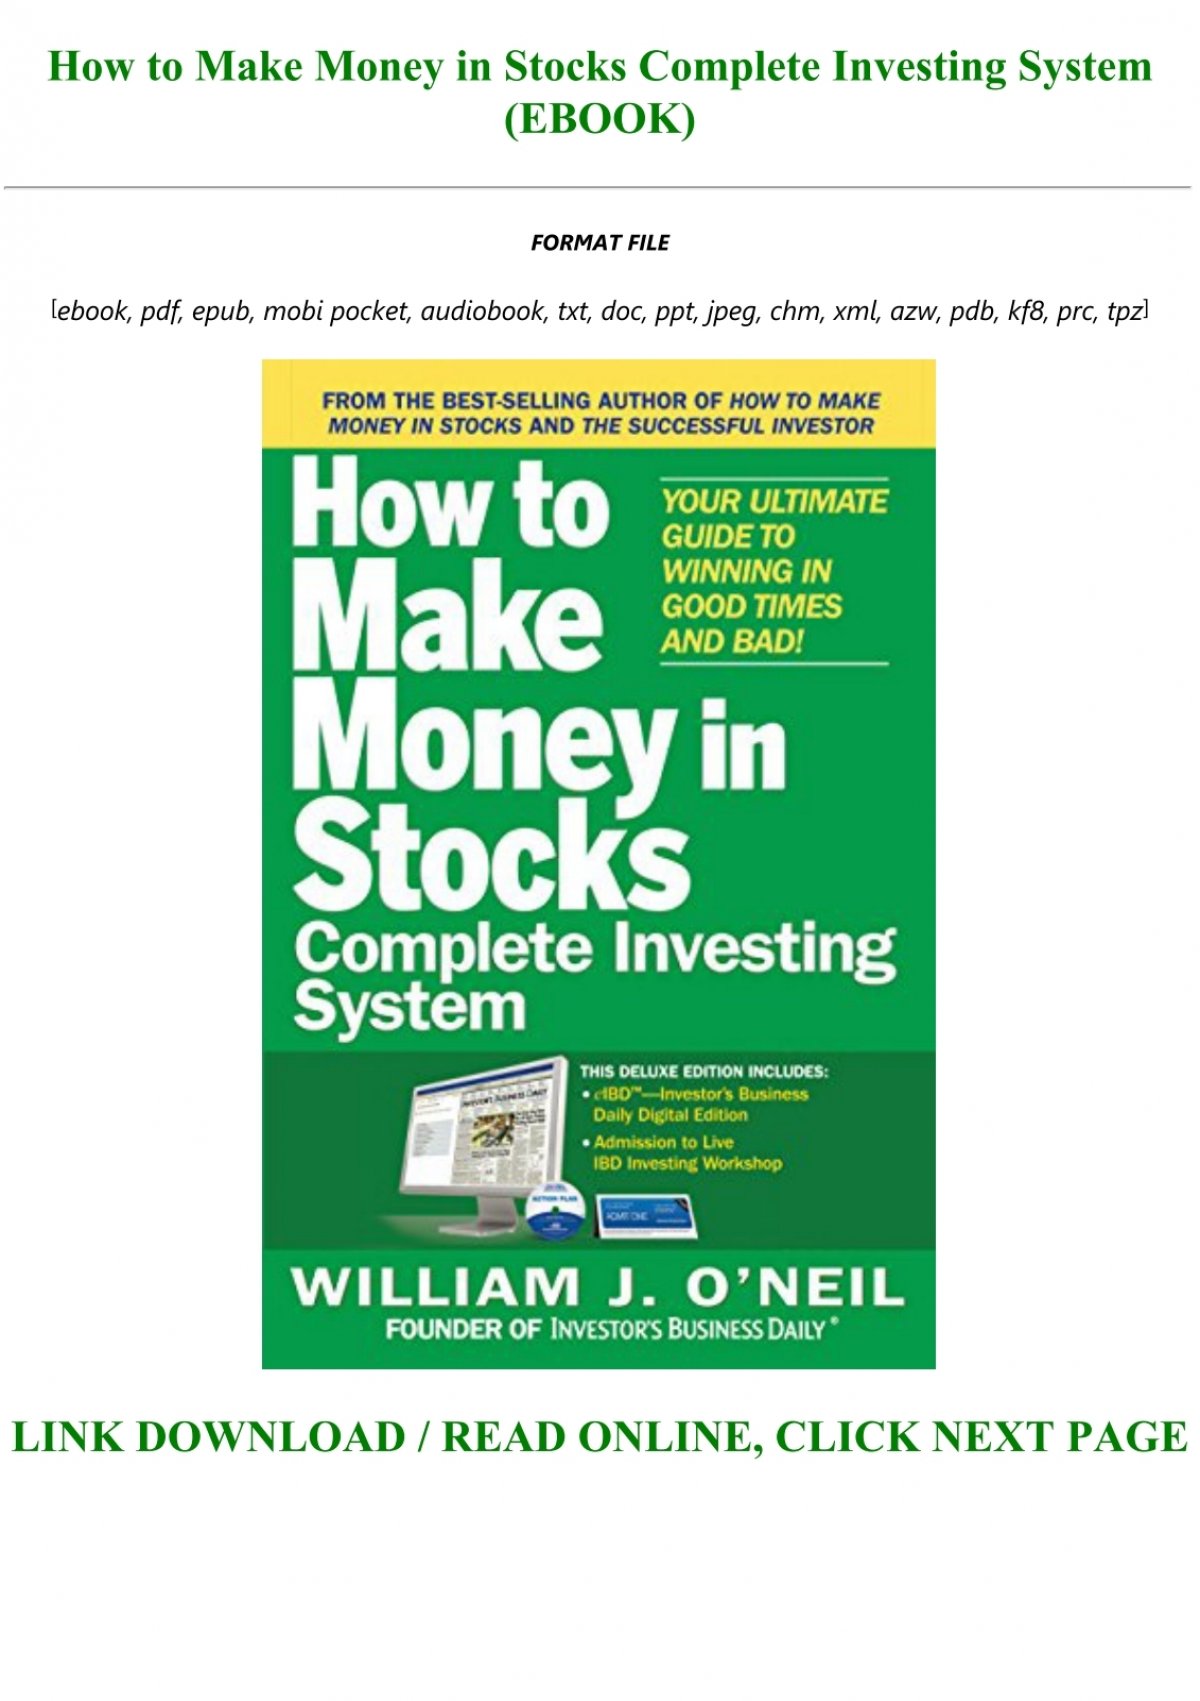 what age can you start investing in stocks - Money|Stocks|Stock|System|Book|Market|Trading|Books|Guide|Times|Day|Der|Download|Investors|Edition|Investor|Description|Pdf|Format|Epub|O'neil|Die|Strategies|Strategy|Mit|Investing|Dummies|Risk|Gains|Business|Man|Investment|Years|World|Wie|Action|Charts|William|Dad|Plan|Good Times|Stock Market|Ultimate Guide|Mobi Format|Full Book|Day Trading|National Bestseller|Successful Investing|Rich Dad|Seven-Step Process|Maximizing Gains|Major Study|American Association|Individual Investors|Mutual Funds|Book Description|Download Book Description|Handbuch Des|Stock Market Winners|12-Year Study|Leading Investment Strategies|Top-Performing Strategy|System-You Get|Easy Steps|Daily Resource|Big Winners|Market Rally|Big Losses|Market Downturn|Canslim Method